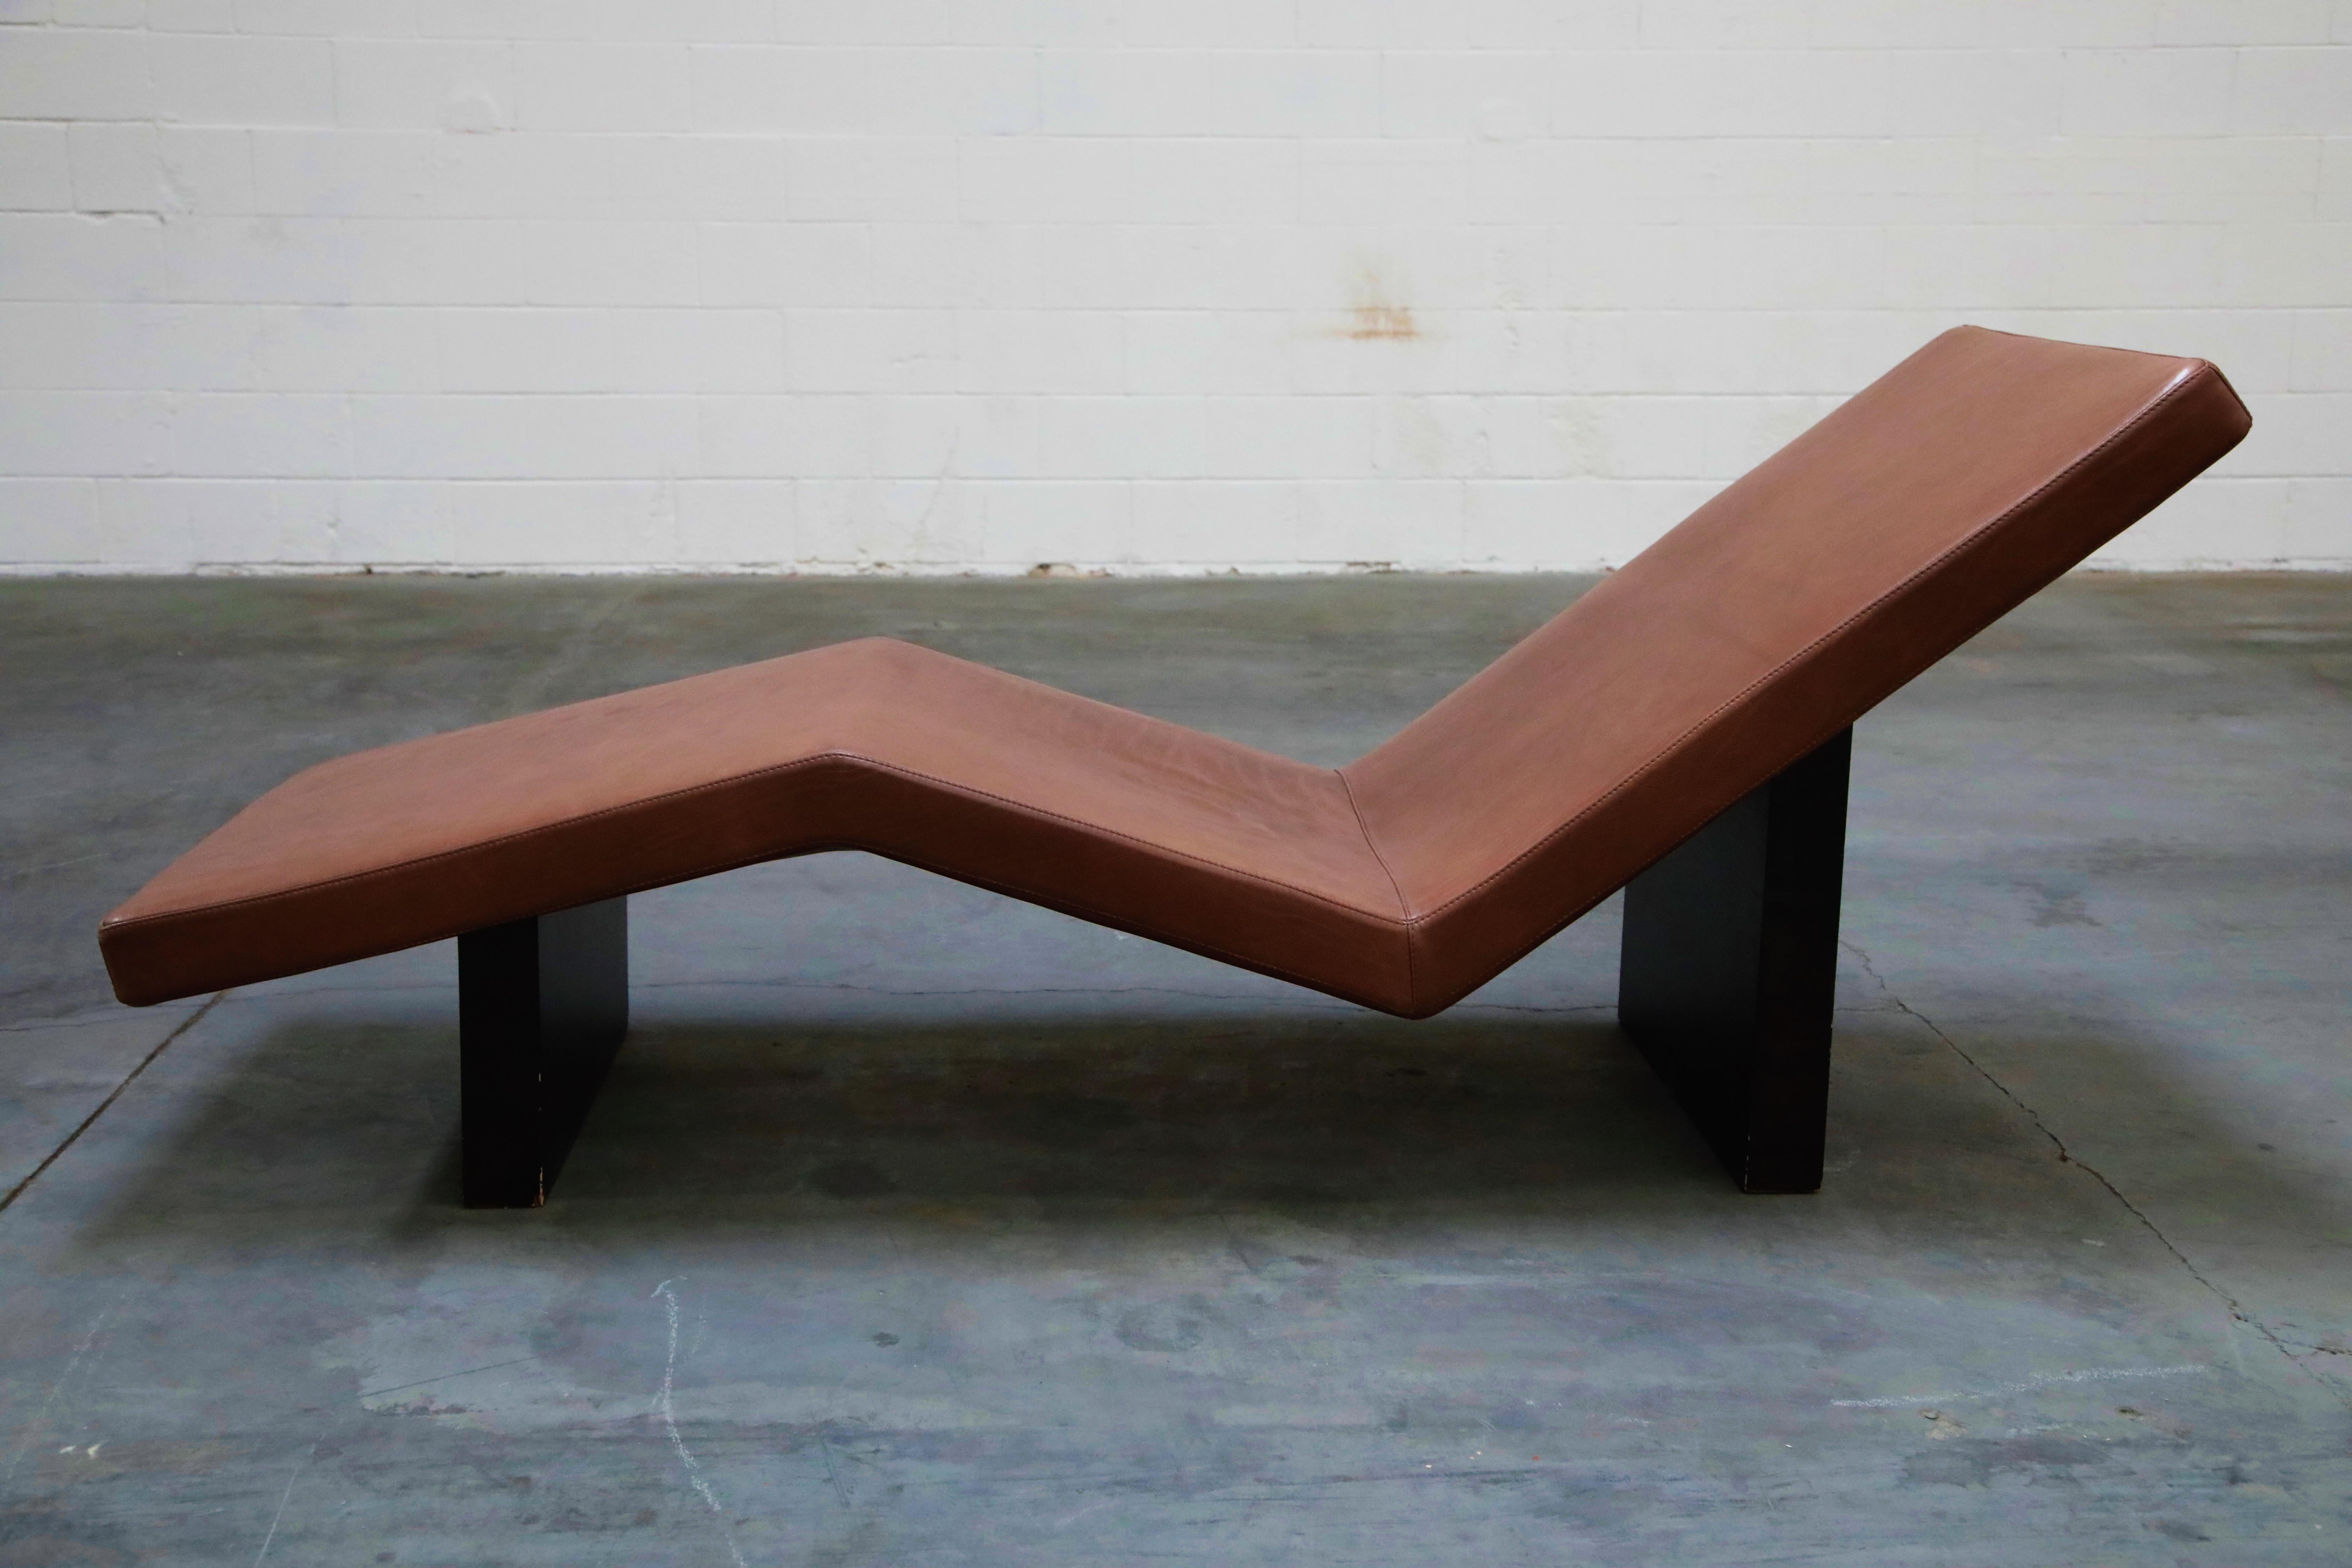 What we love most about this chaise is the shape... as it resembles a corporate sales and earnings graph going in the direction you want it to go... up! So while the official name of this design is not the 